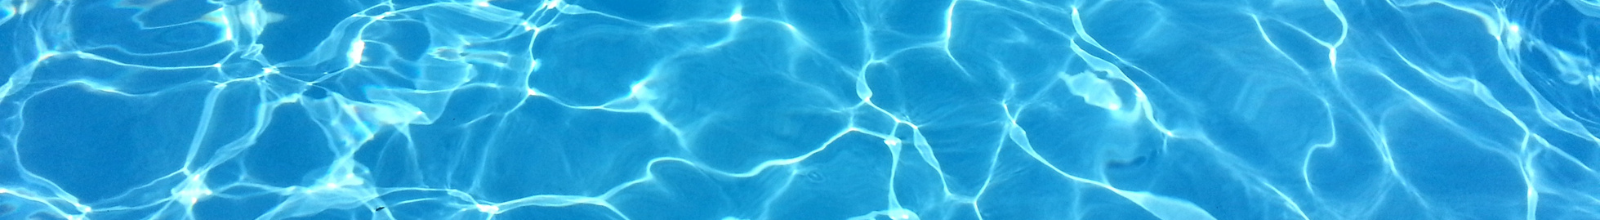 Waves of a swimming pool